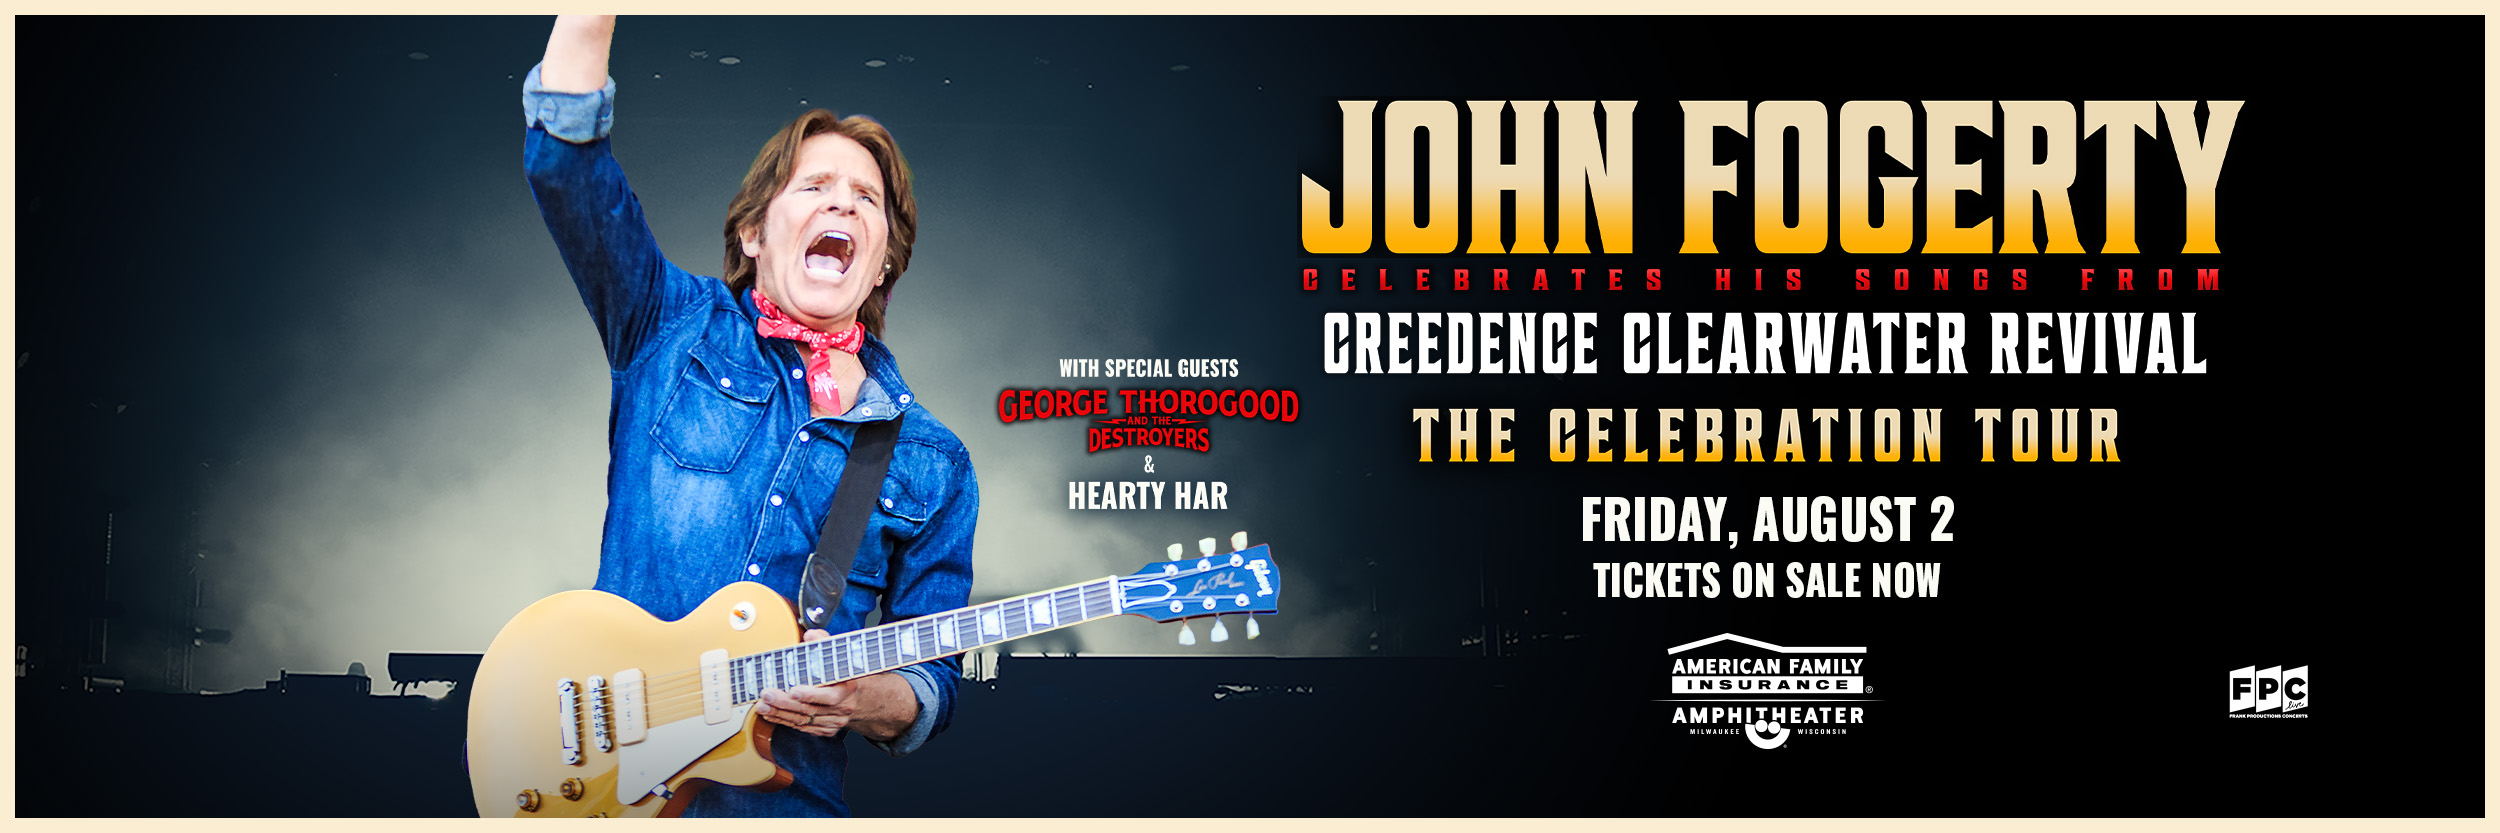 John Fogerty - The Celebration Tour with special guests George Thorogood and the Destroyers & Hearty Har.  